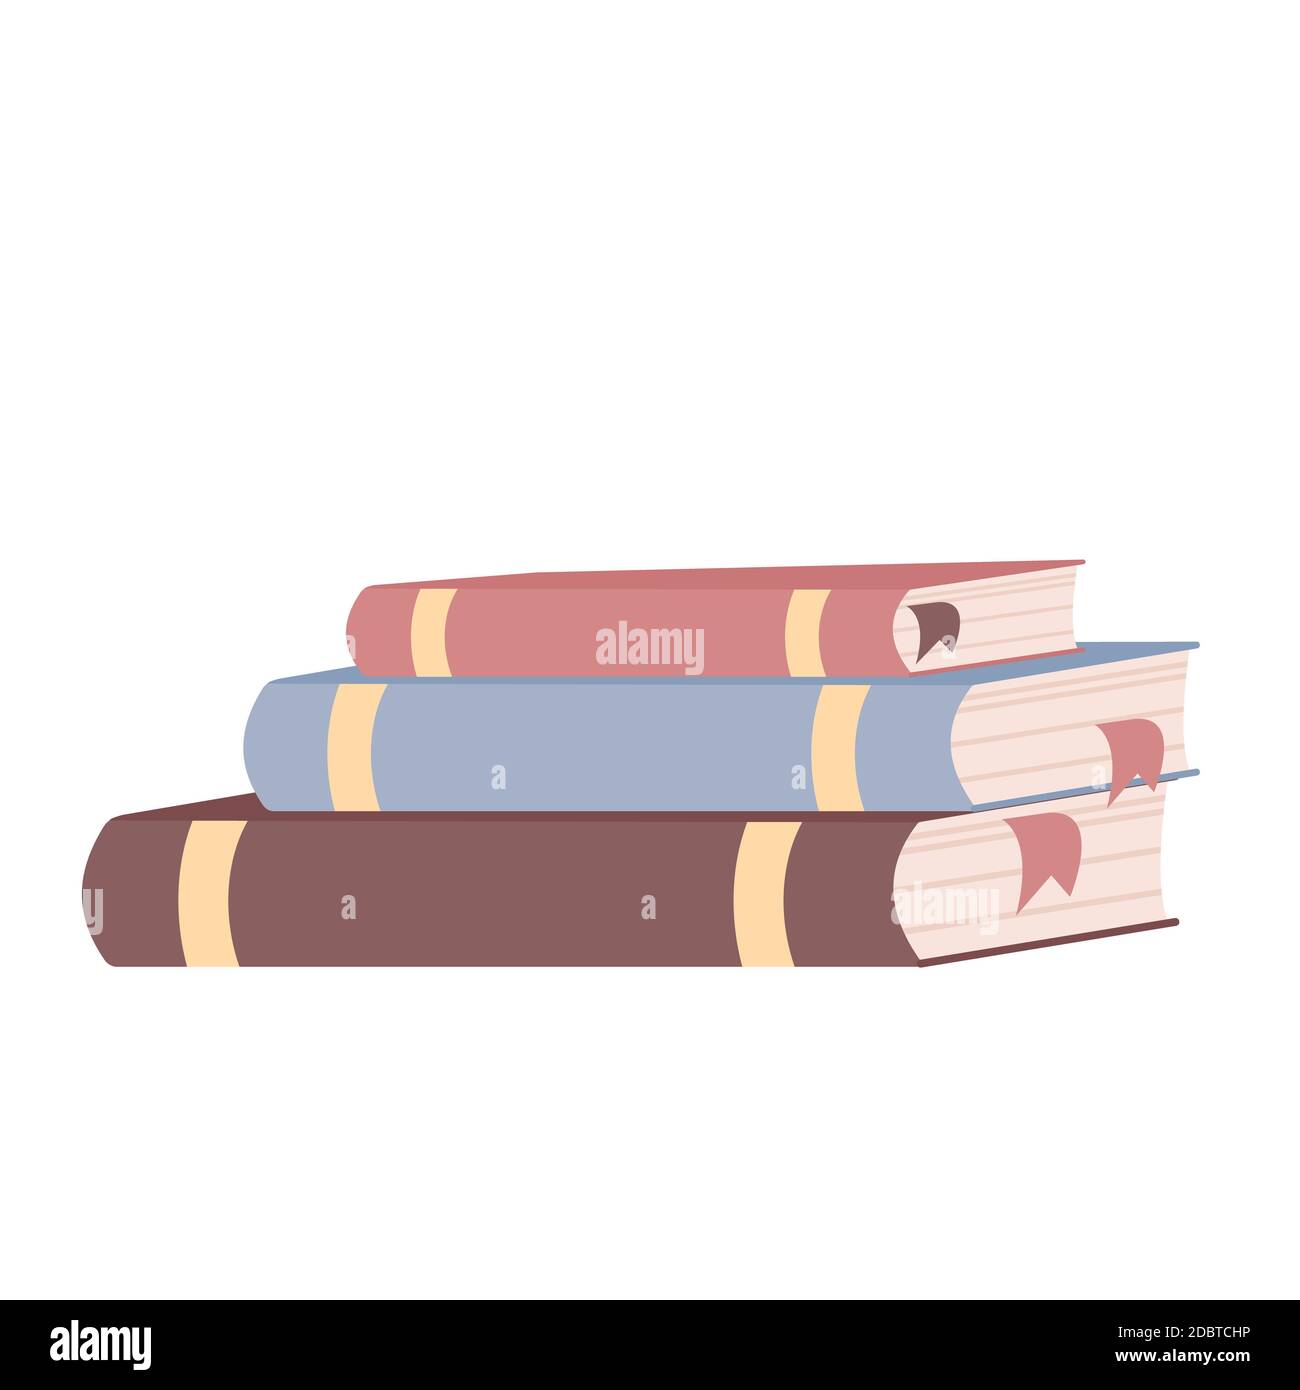 https://c8.alamy.com/comp/2DBTCHP/books-stack-cartoon-vector-illustration-textbooks-with-bookmarks-flat-color-objects-student-accessory-educational-materials-isolated-on-white-backg-2DBTCHP.jpg